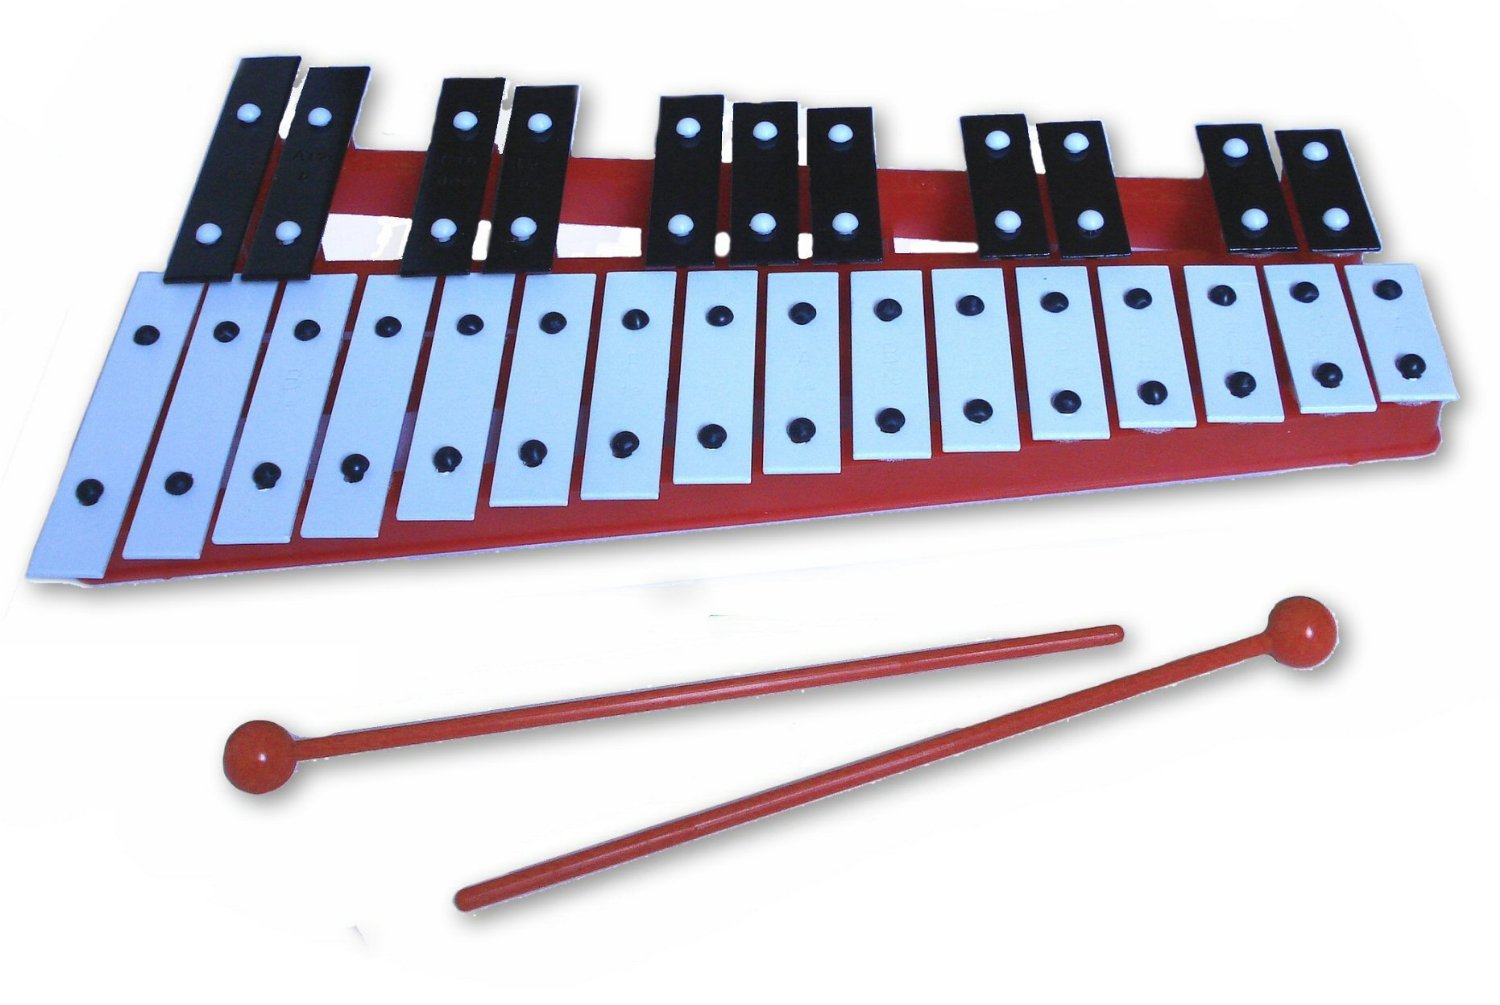 xylophone pictures clip art - photo #37